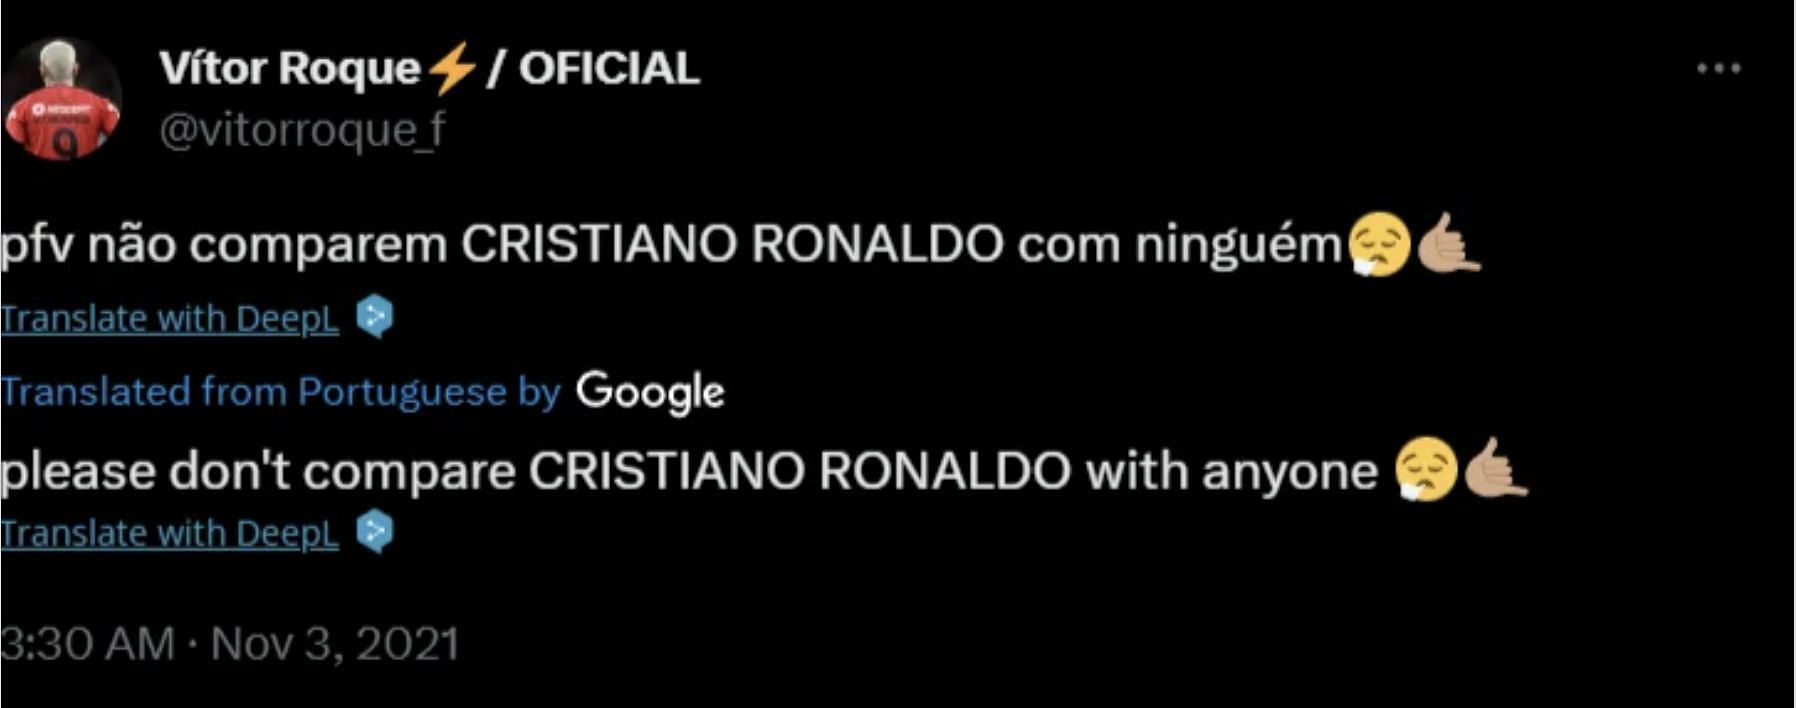 Vitor Roque ranking Cristiano Ronaldo as the best in 2021